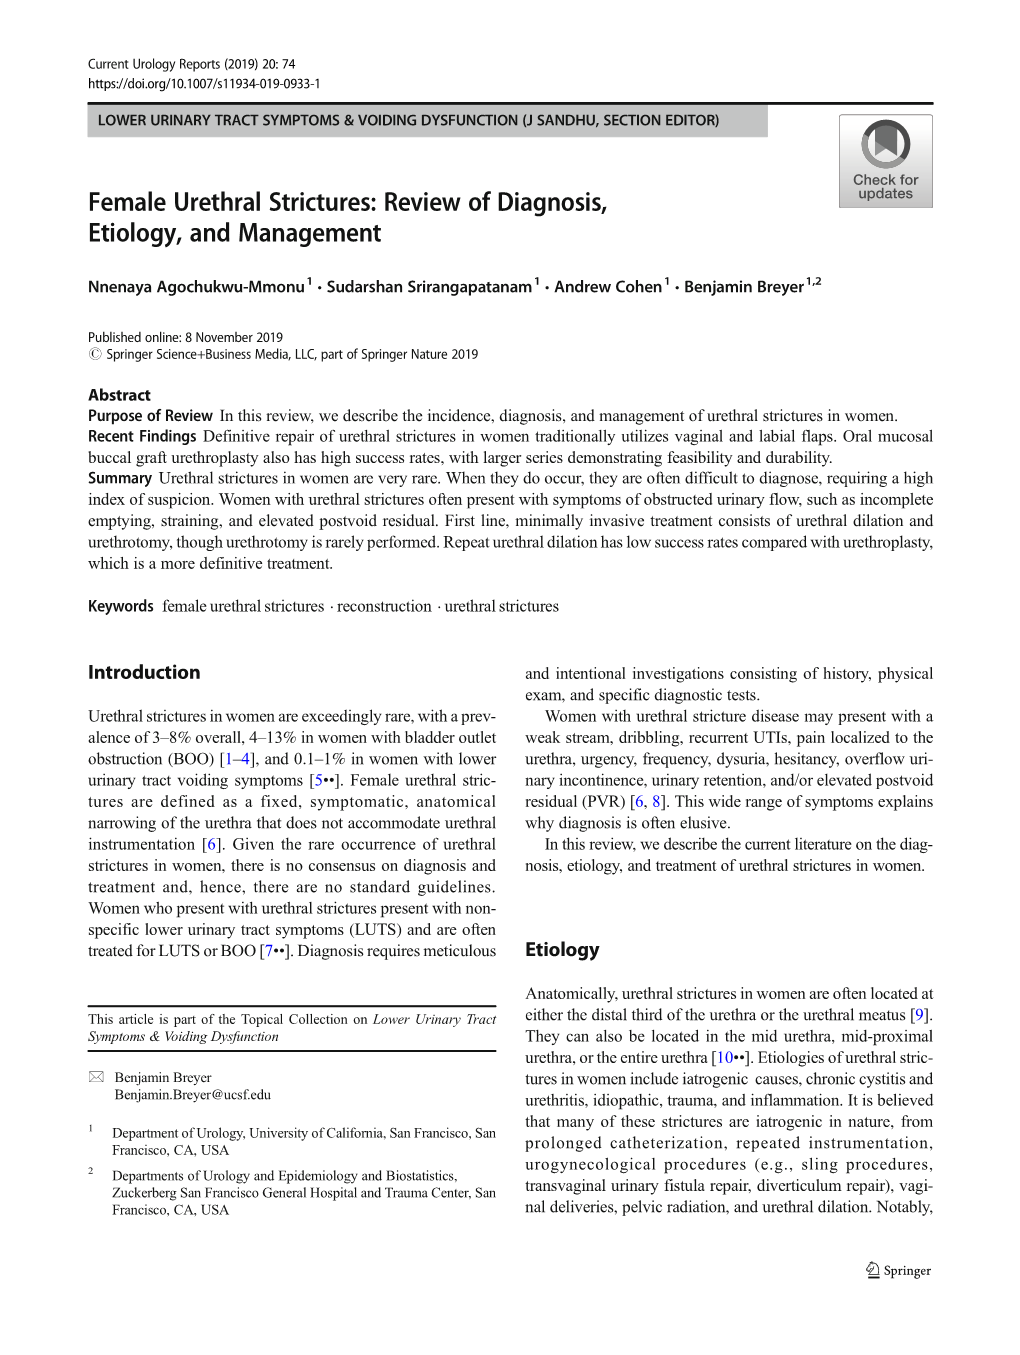 Female Urethral Strictures: Review of Diagnosis, Etiology, and Management